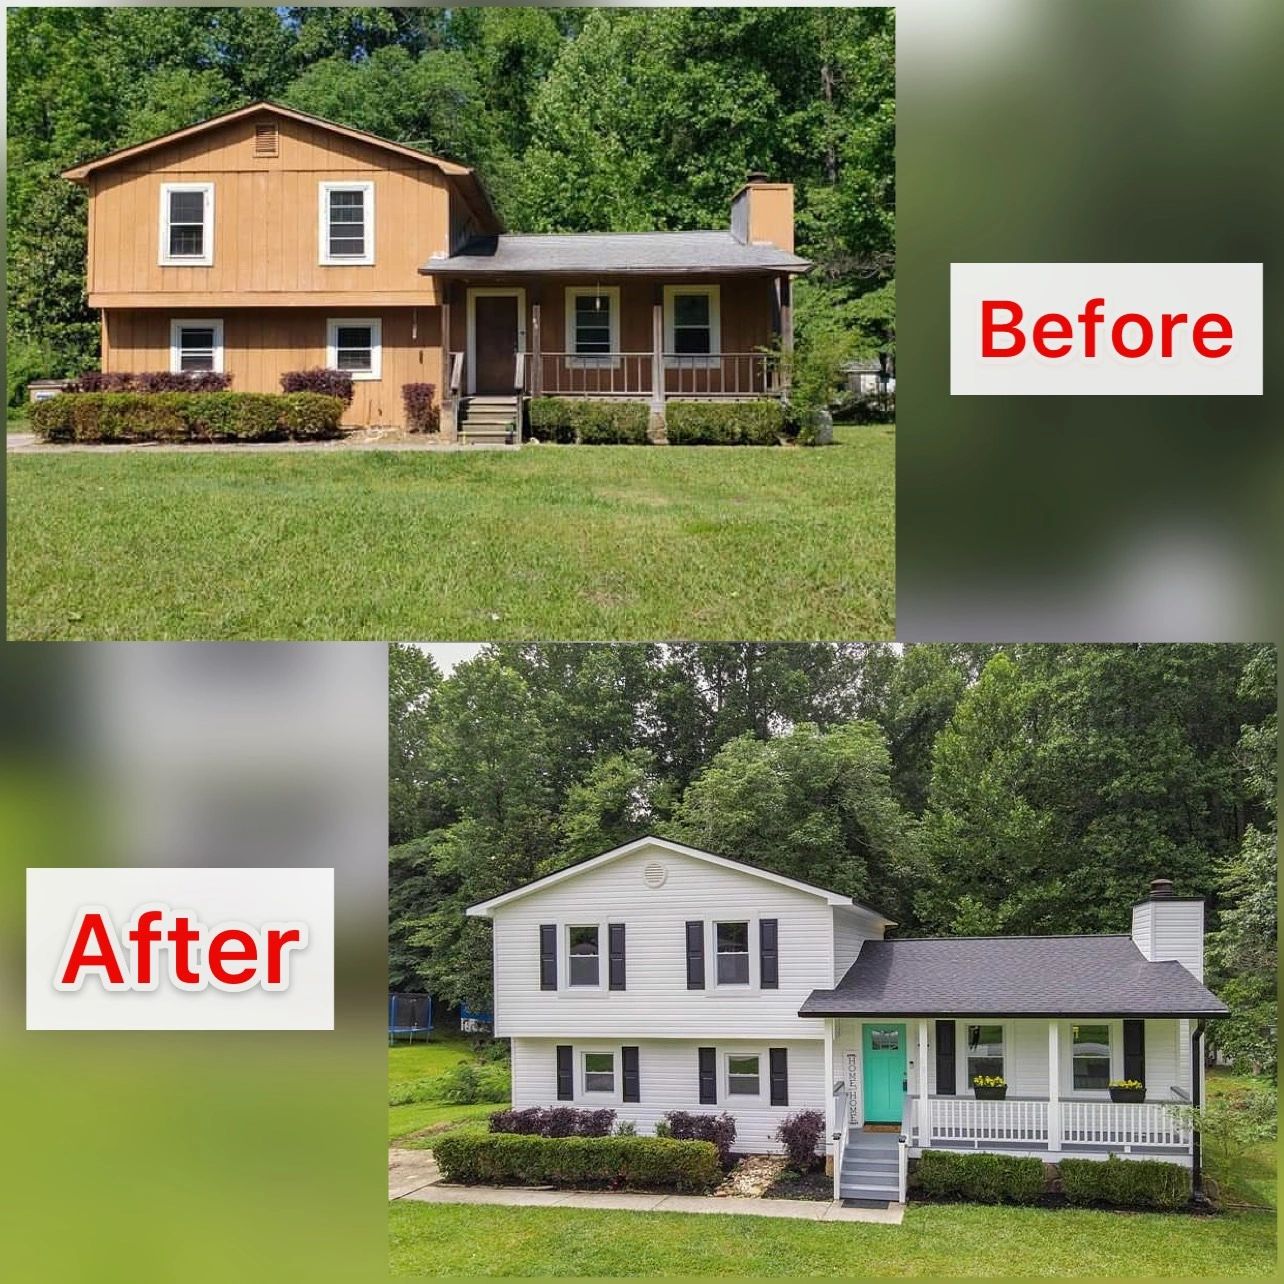 Before and after of a house remodel